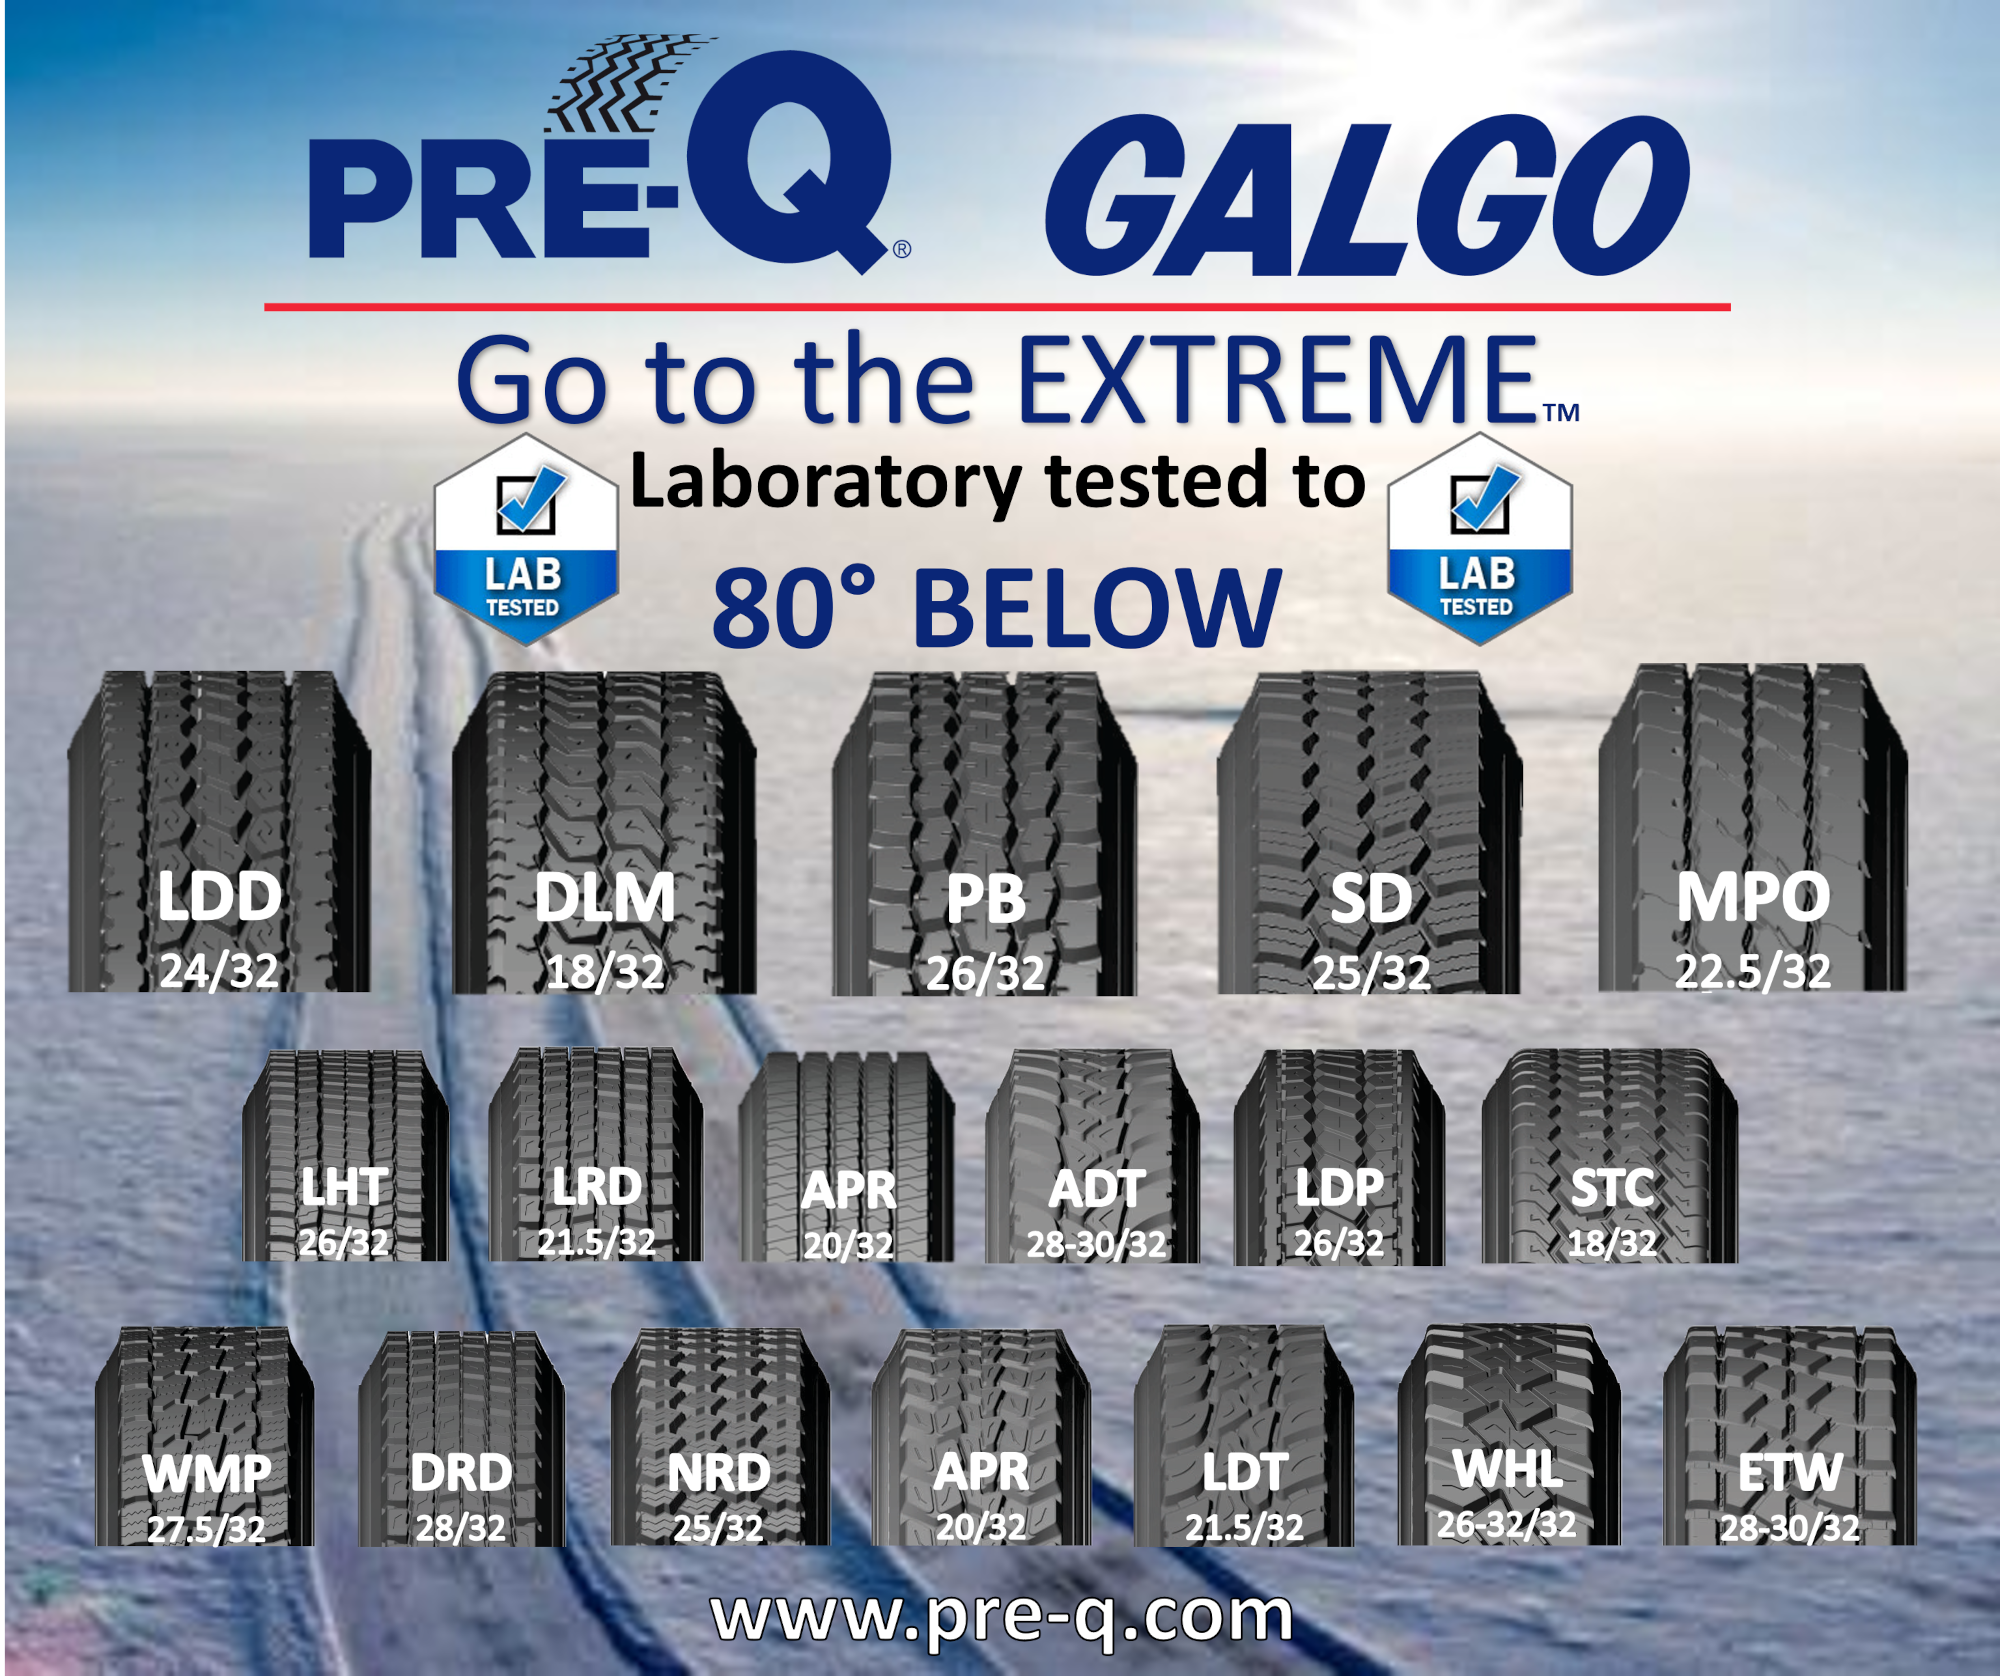 Galgo adds 5 designs to ‘Extreme’ range of winter treads